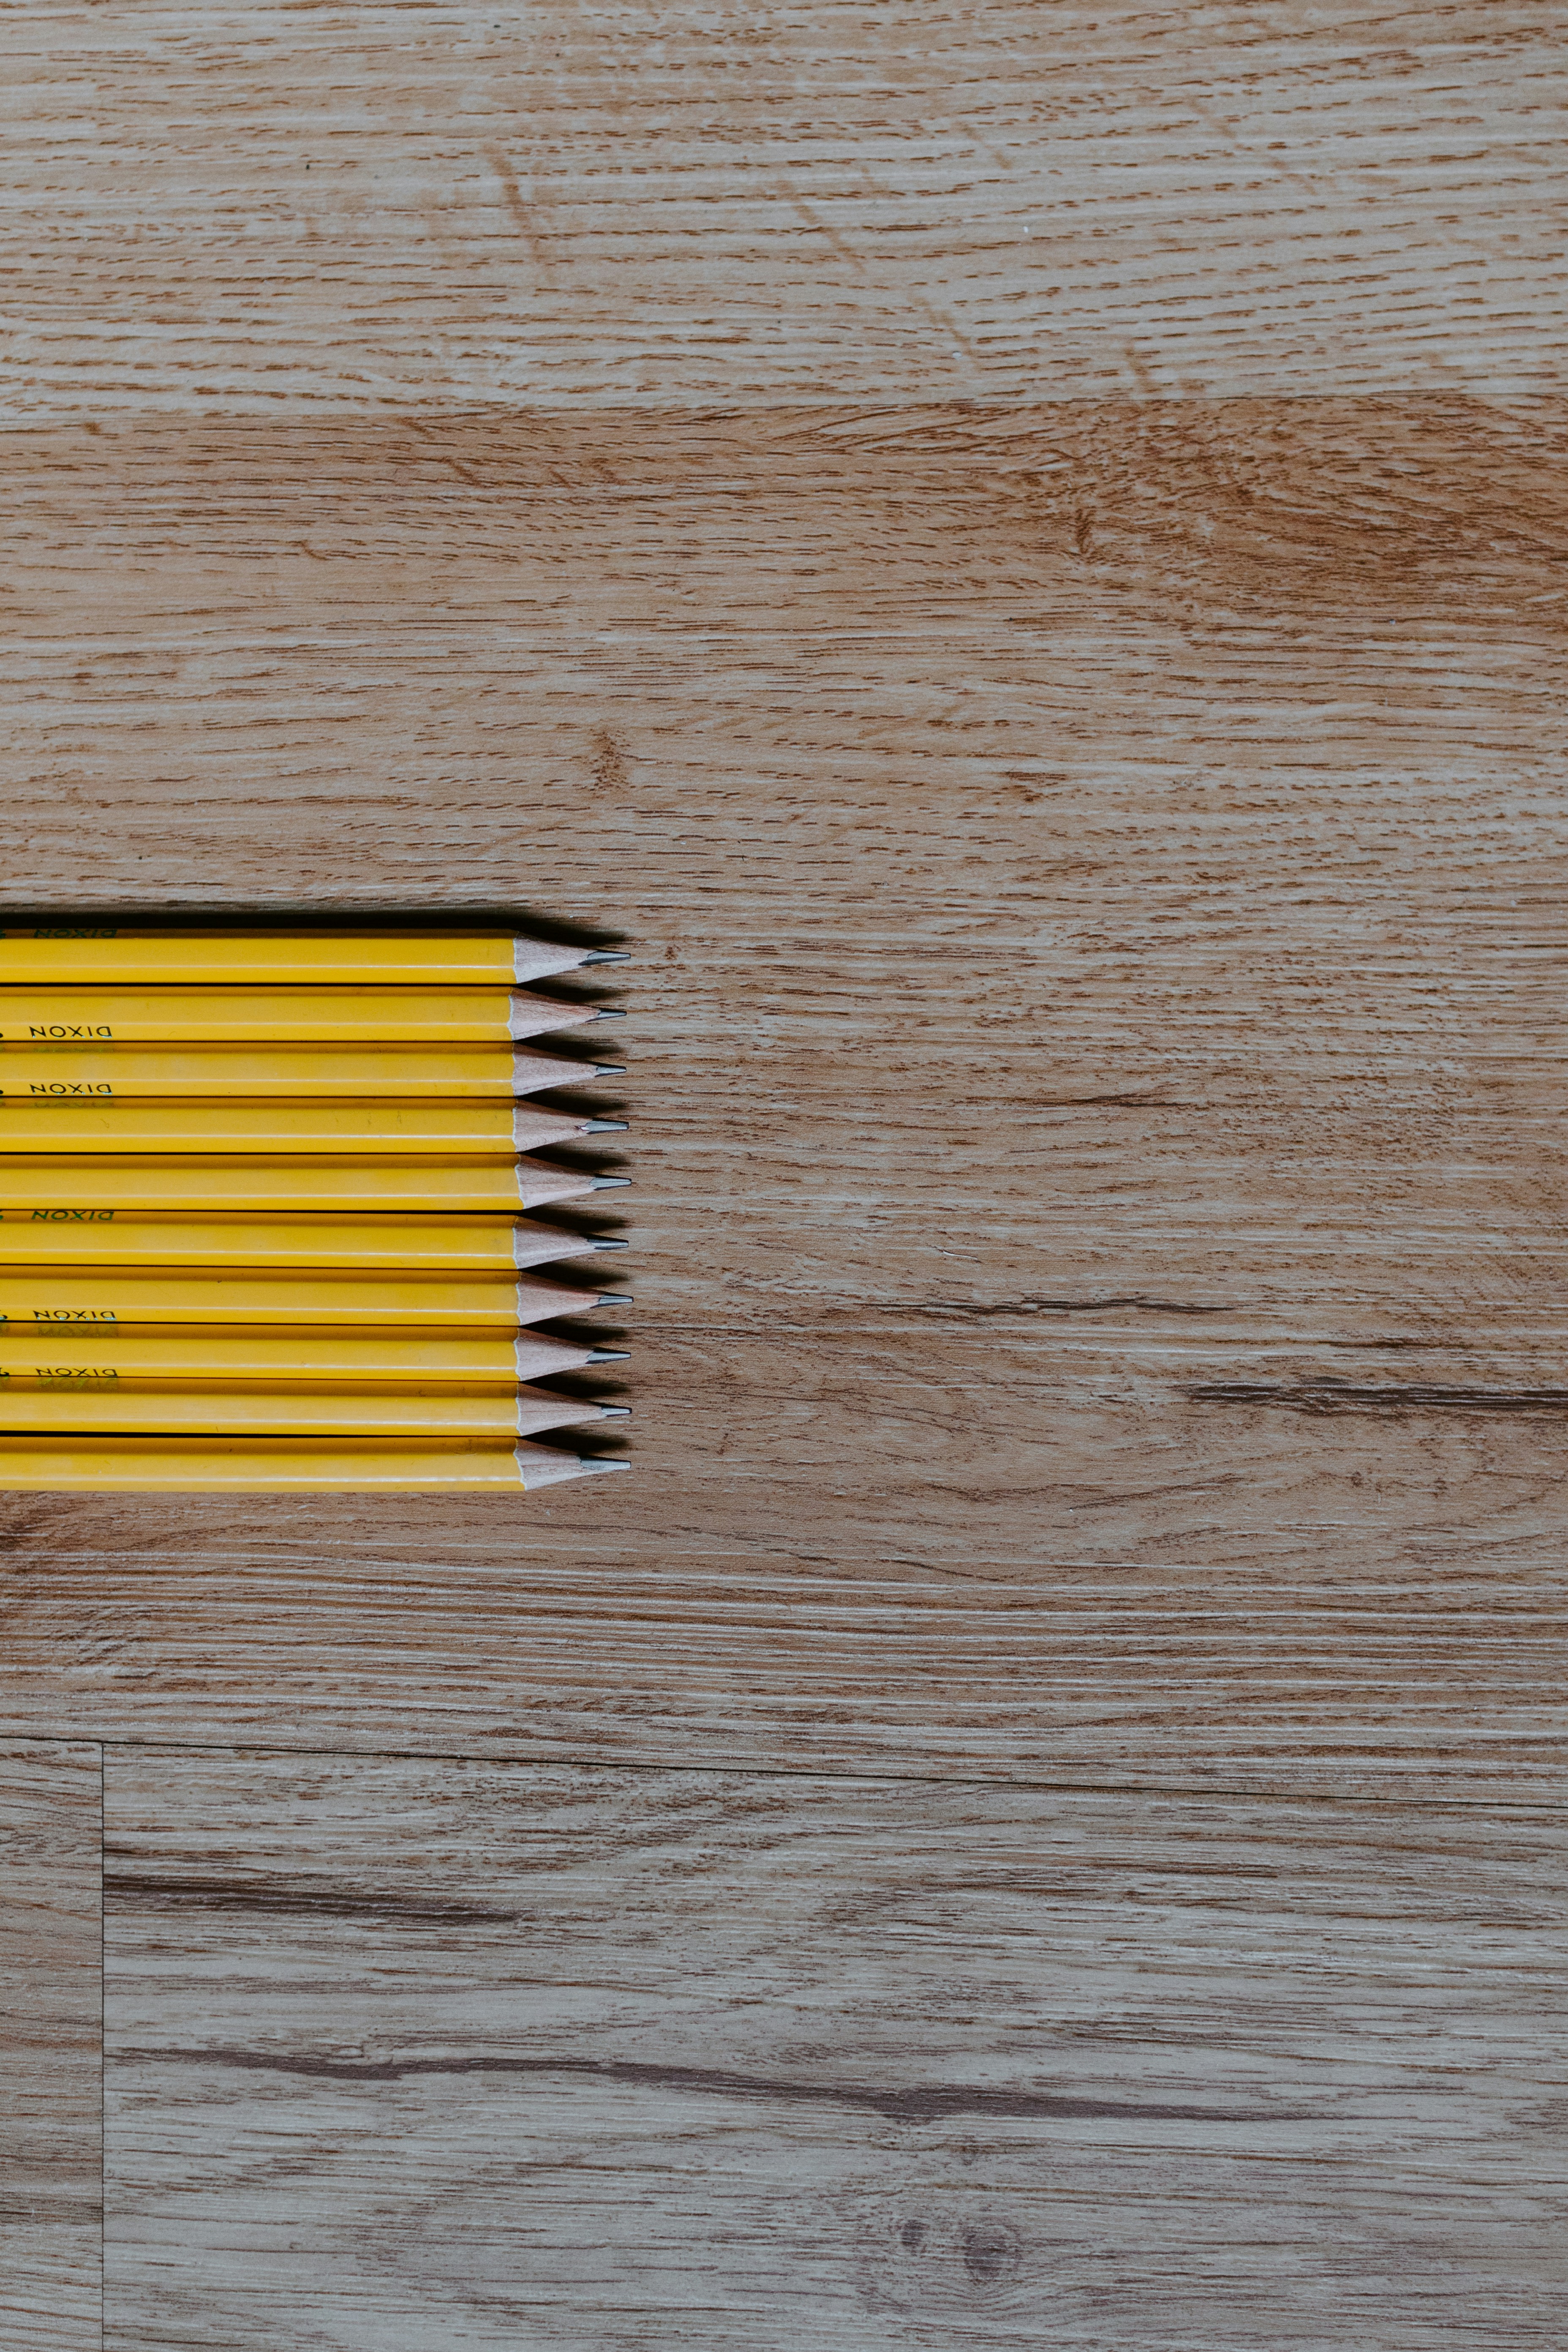 Photograph of a wood desktop with 10 yellow pencils lying horizontally on the left side